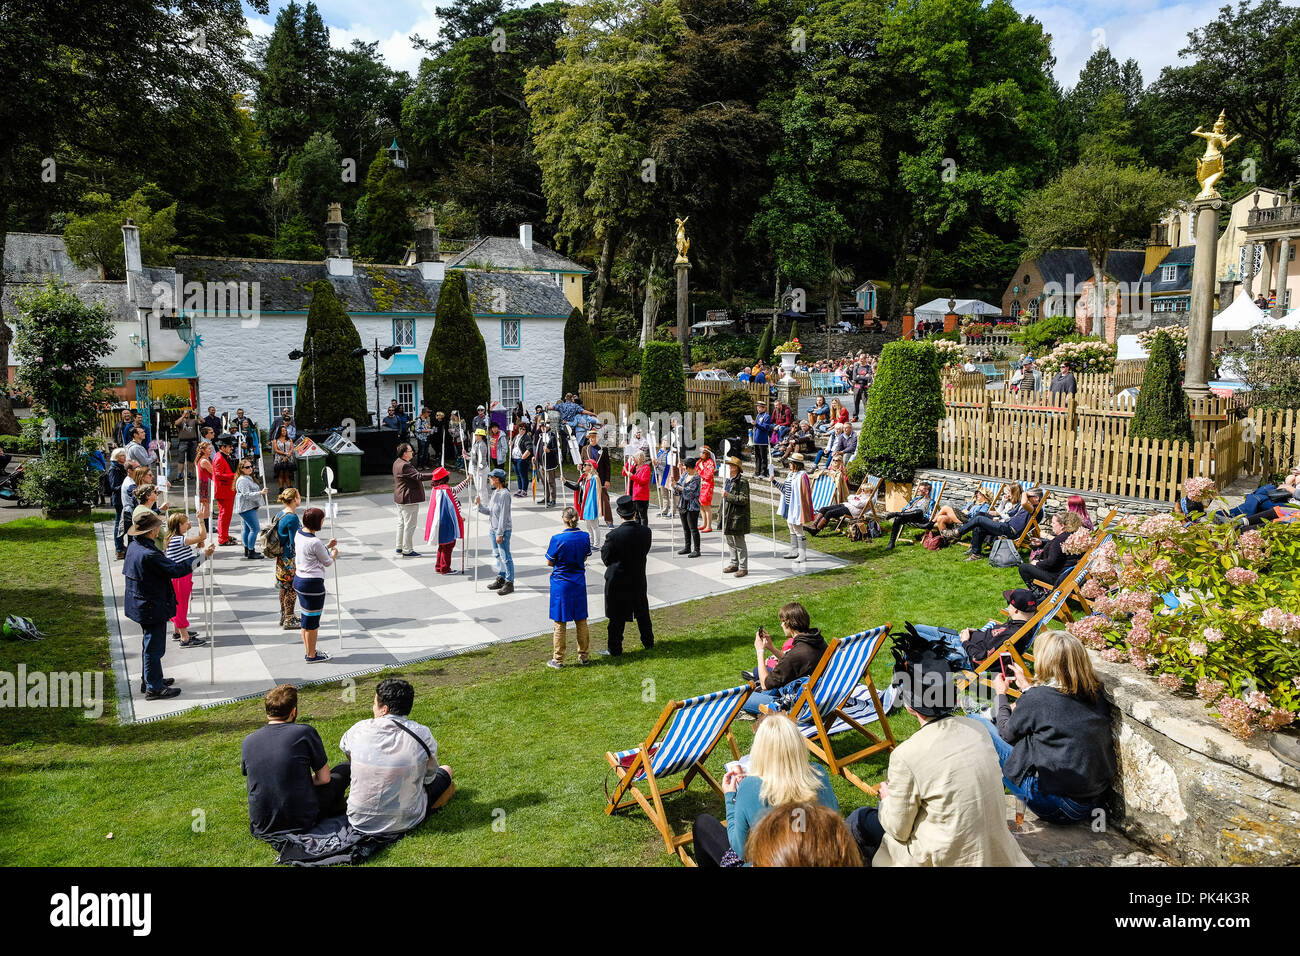 Human Chess from The Prisoner at Festival No 6 on Friday 7 September 2018 held at Portmeirion, Gwynedd, North Wales.  Pictured: The Six of One society play out a famous scene from the Episoce 'Checkmate' from TV series The Prisoner on a permanent chess board laid out for the purpose in the Central Piazza. Picture by Julie Edwards. Stock Photo